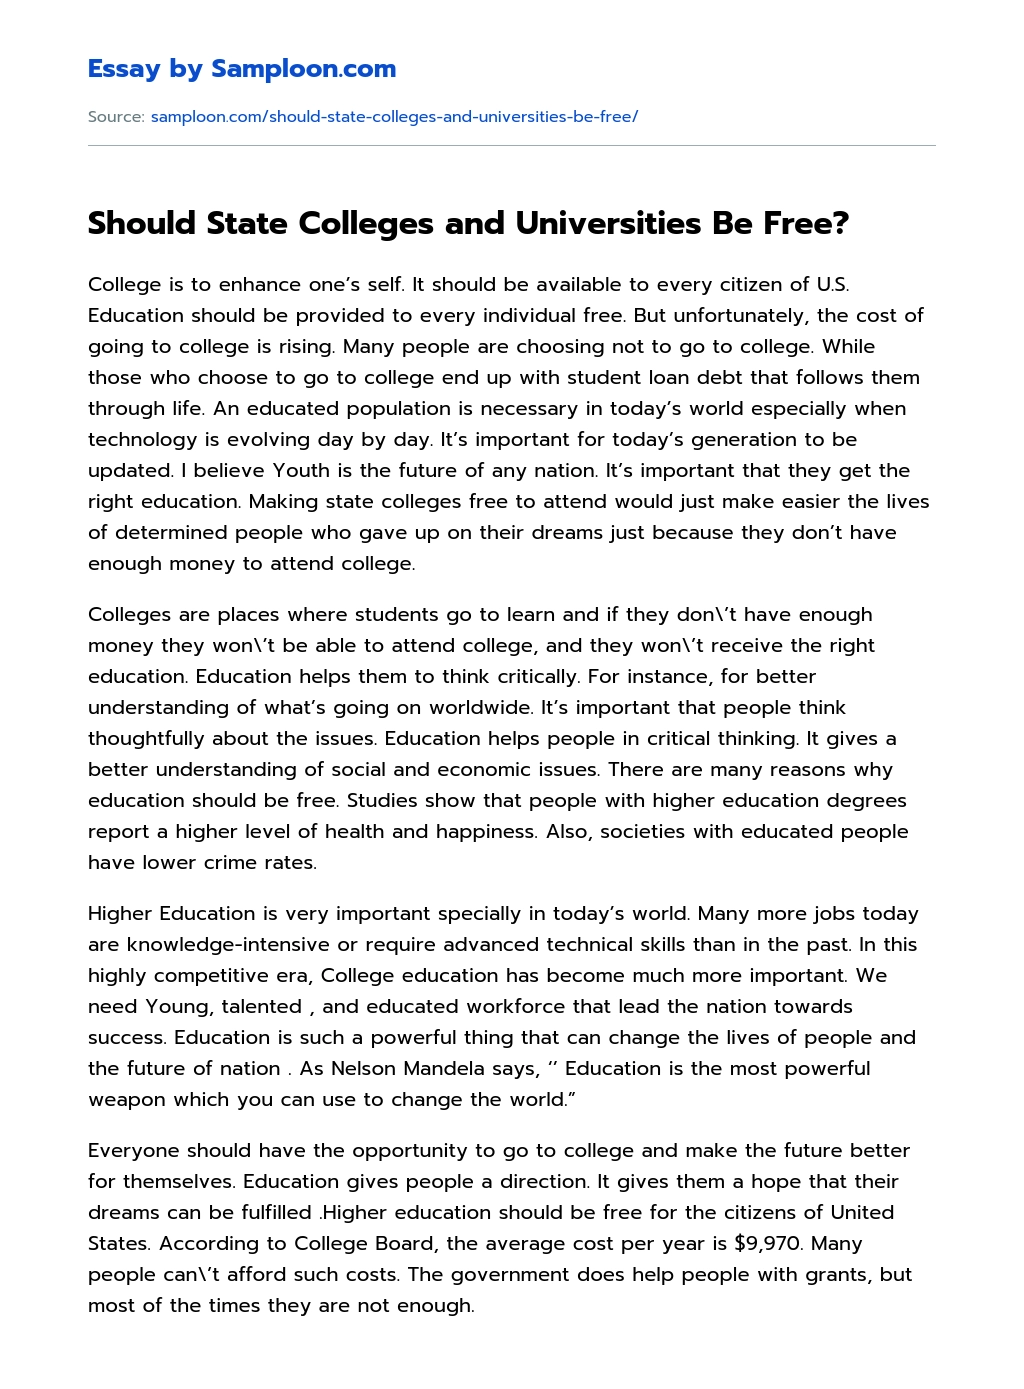 Should State Colleges and Universities Be Free? essay